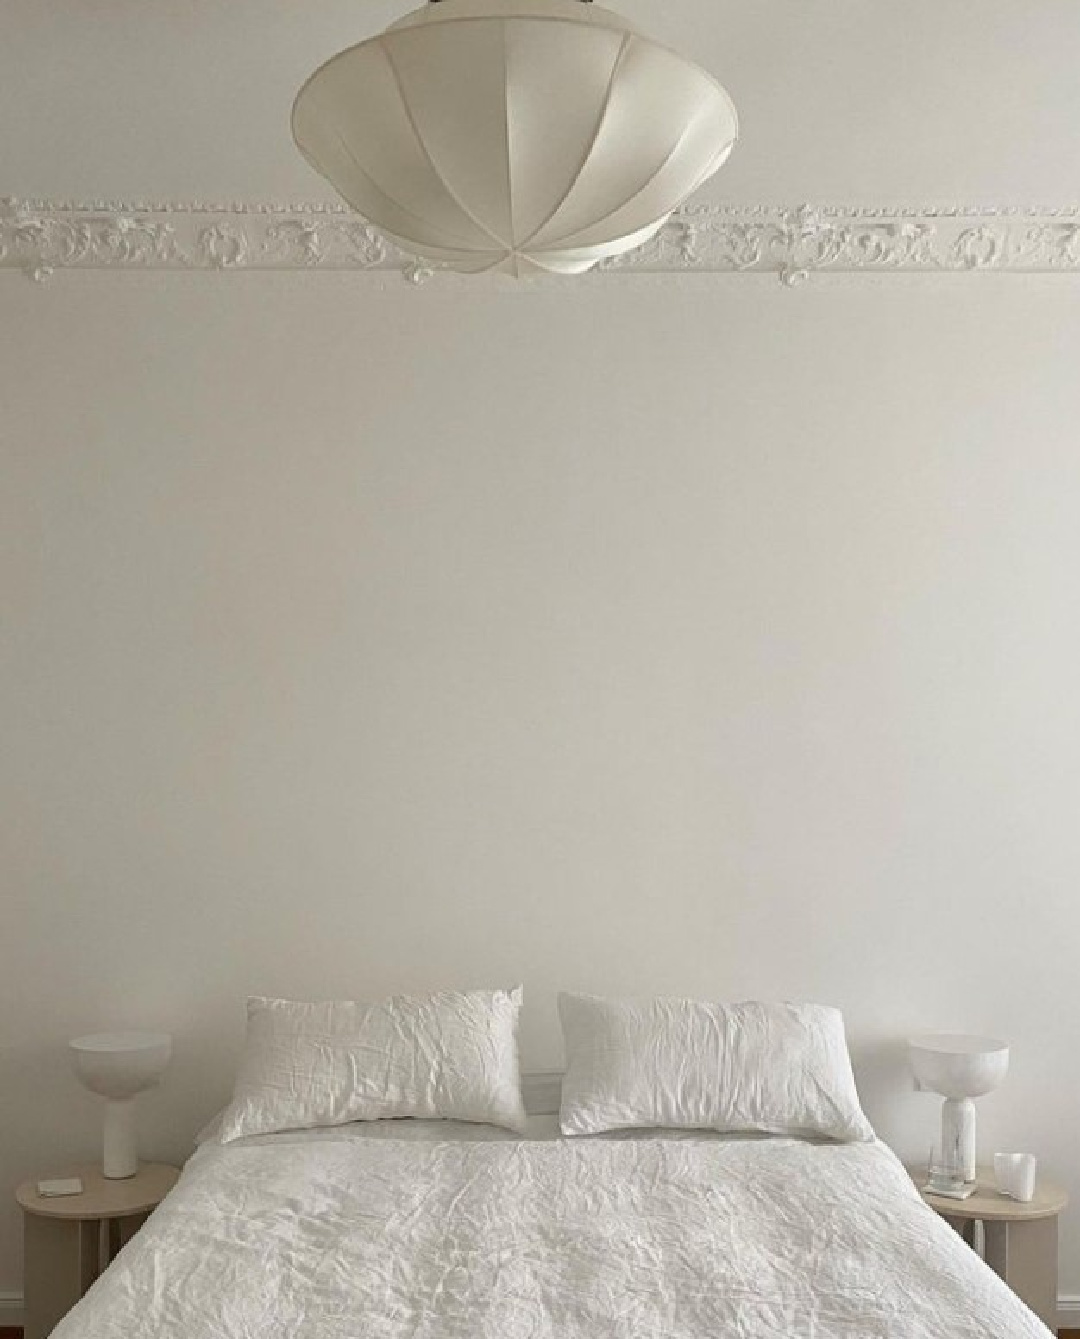 Serene warm greige white bedroom with ornamental crown molding and low side tables - @rebeccagoddard.